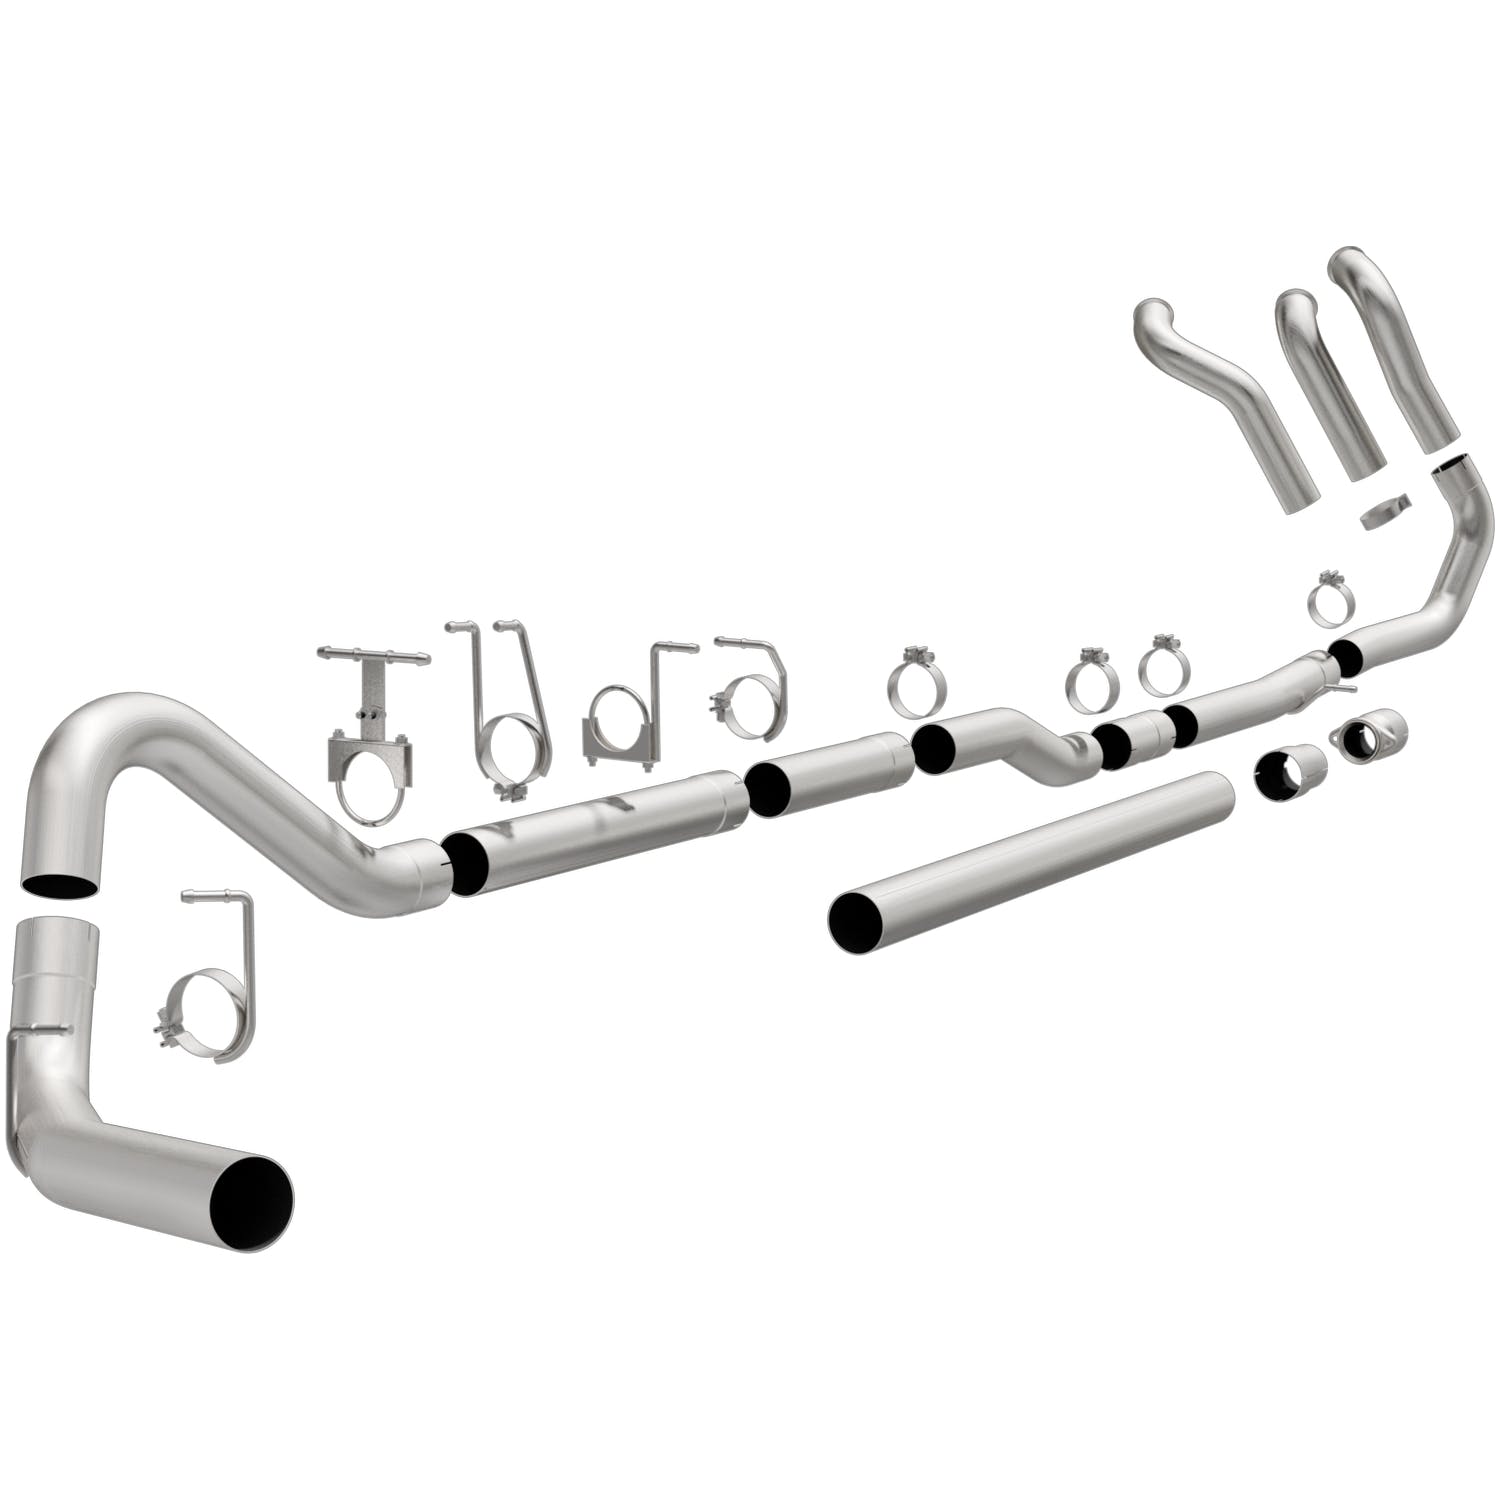 MagnaFlow Exhaust Products 18945 Cat Back-Diesel Aluminized